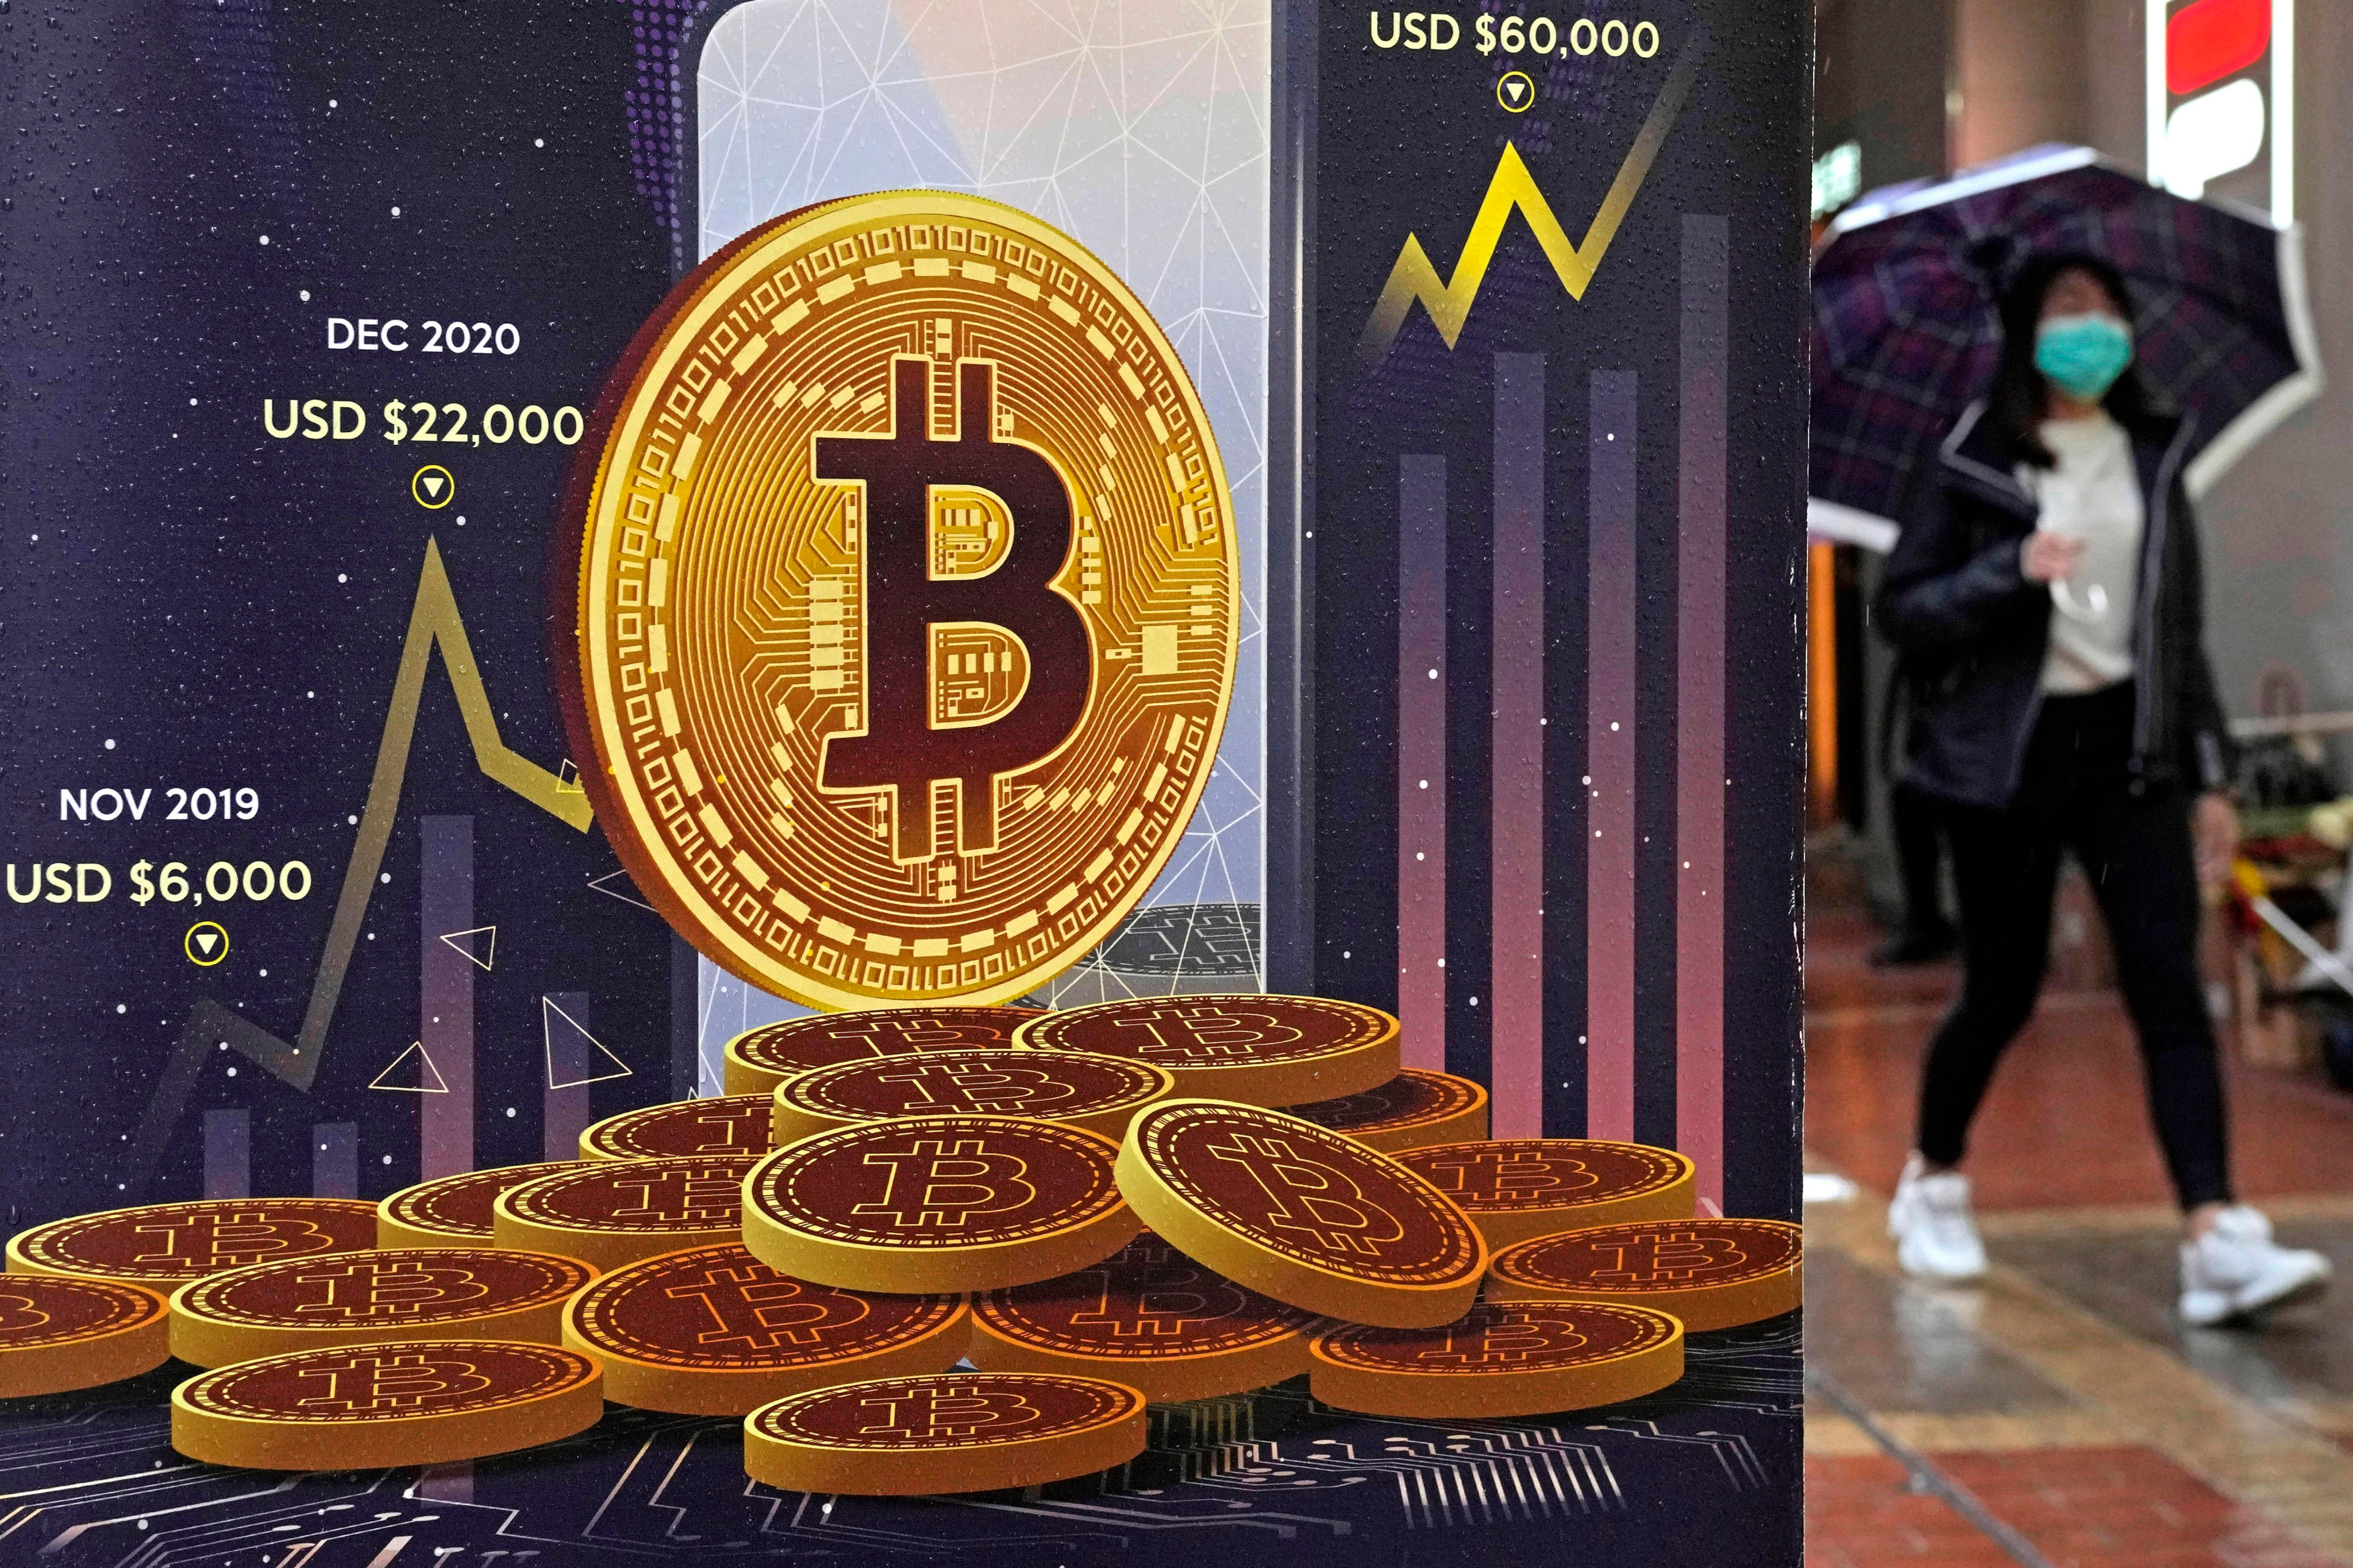 An advertisement for Bitcoin cryptocurrency is displayed on a street in Hong Kong on February 17, 2022. Photo: AP